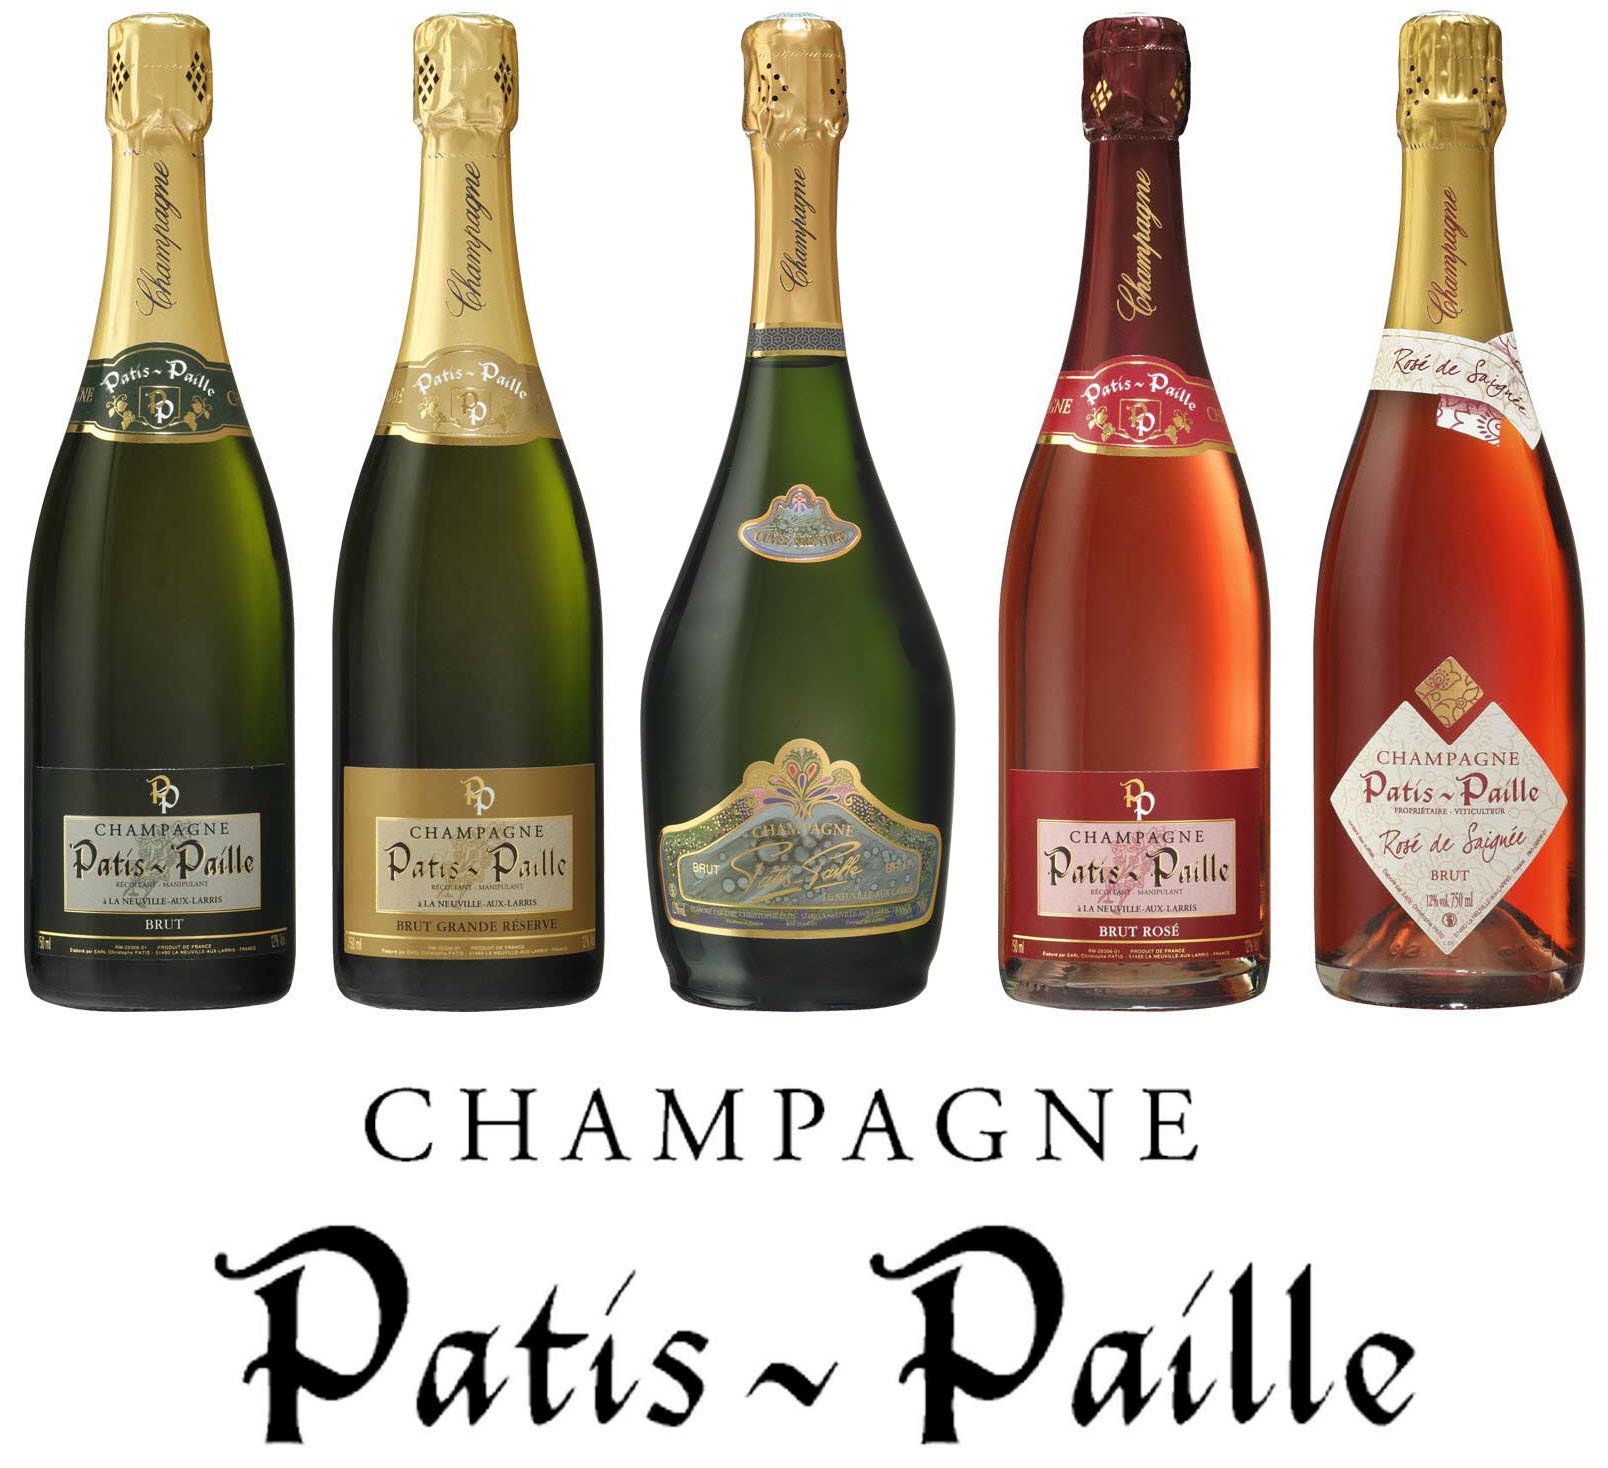 Champagne Patis Paille